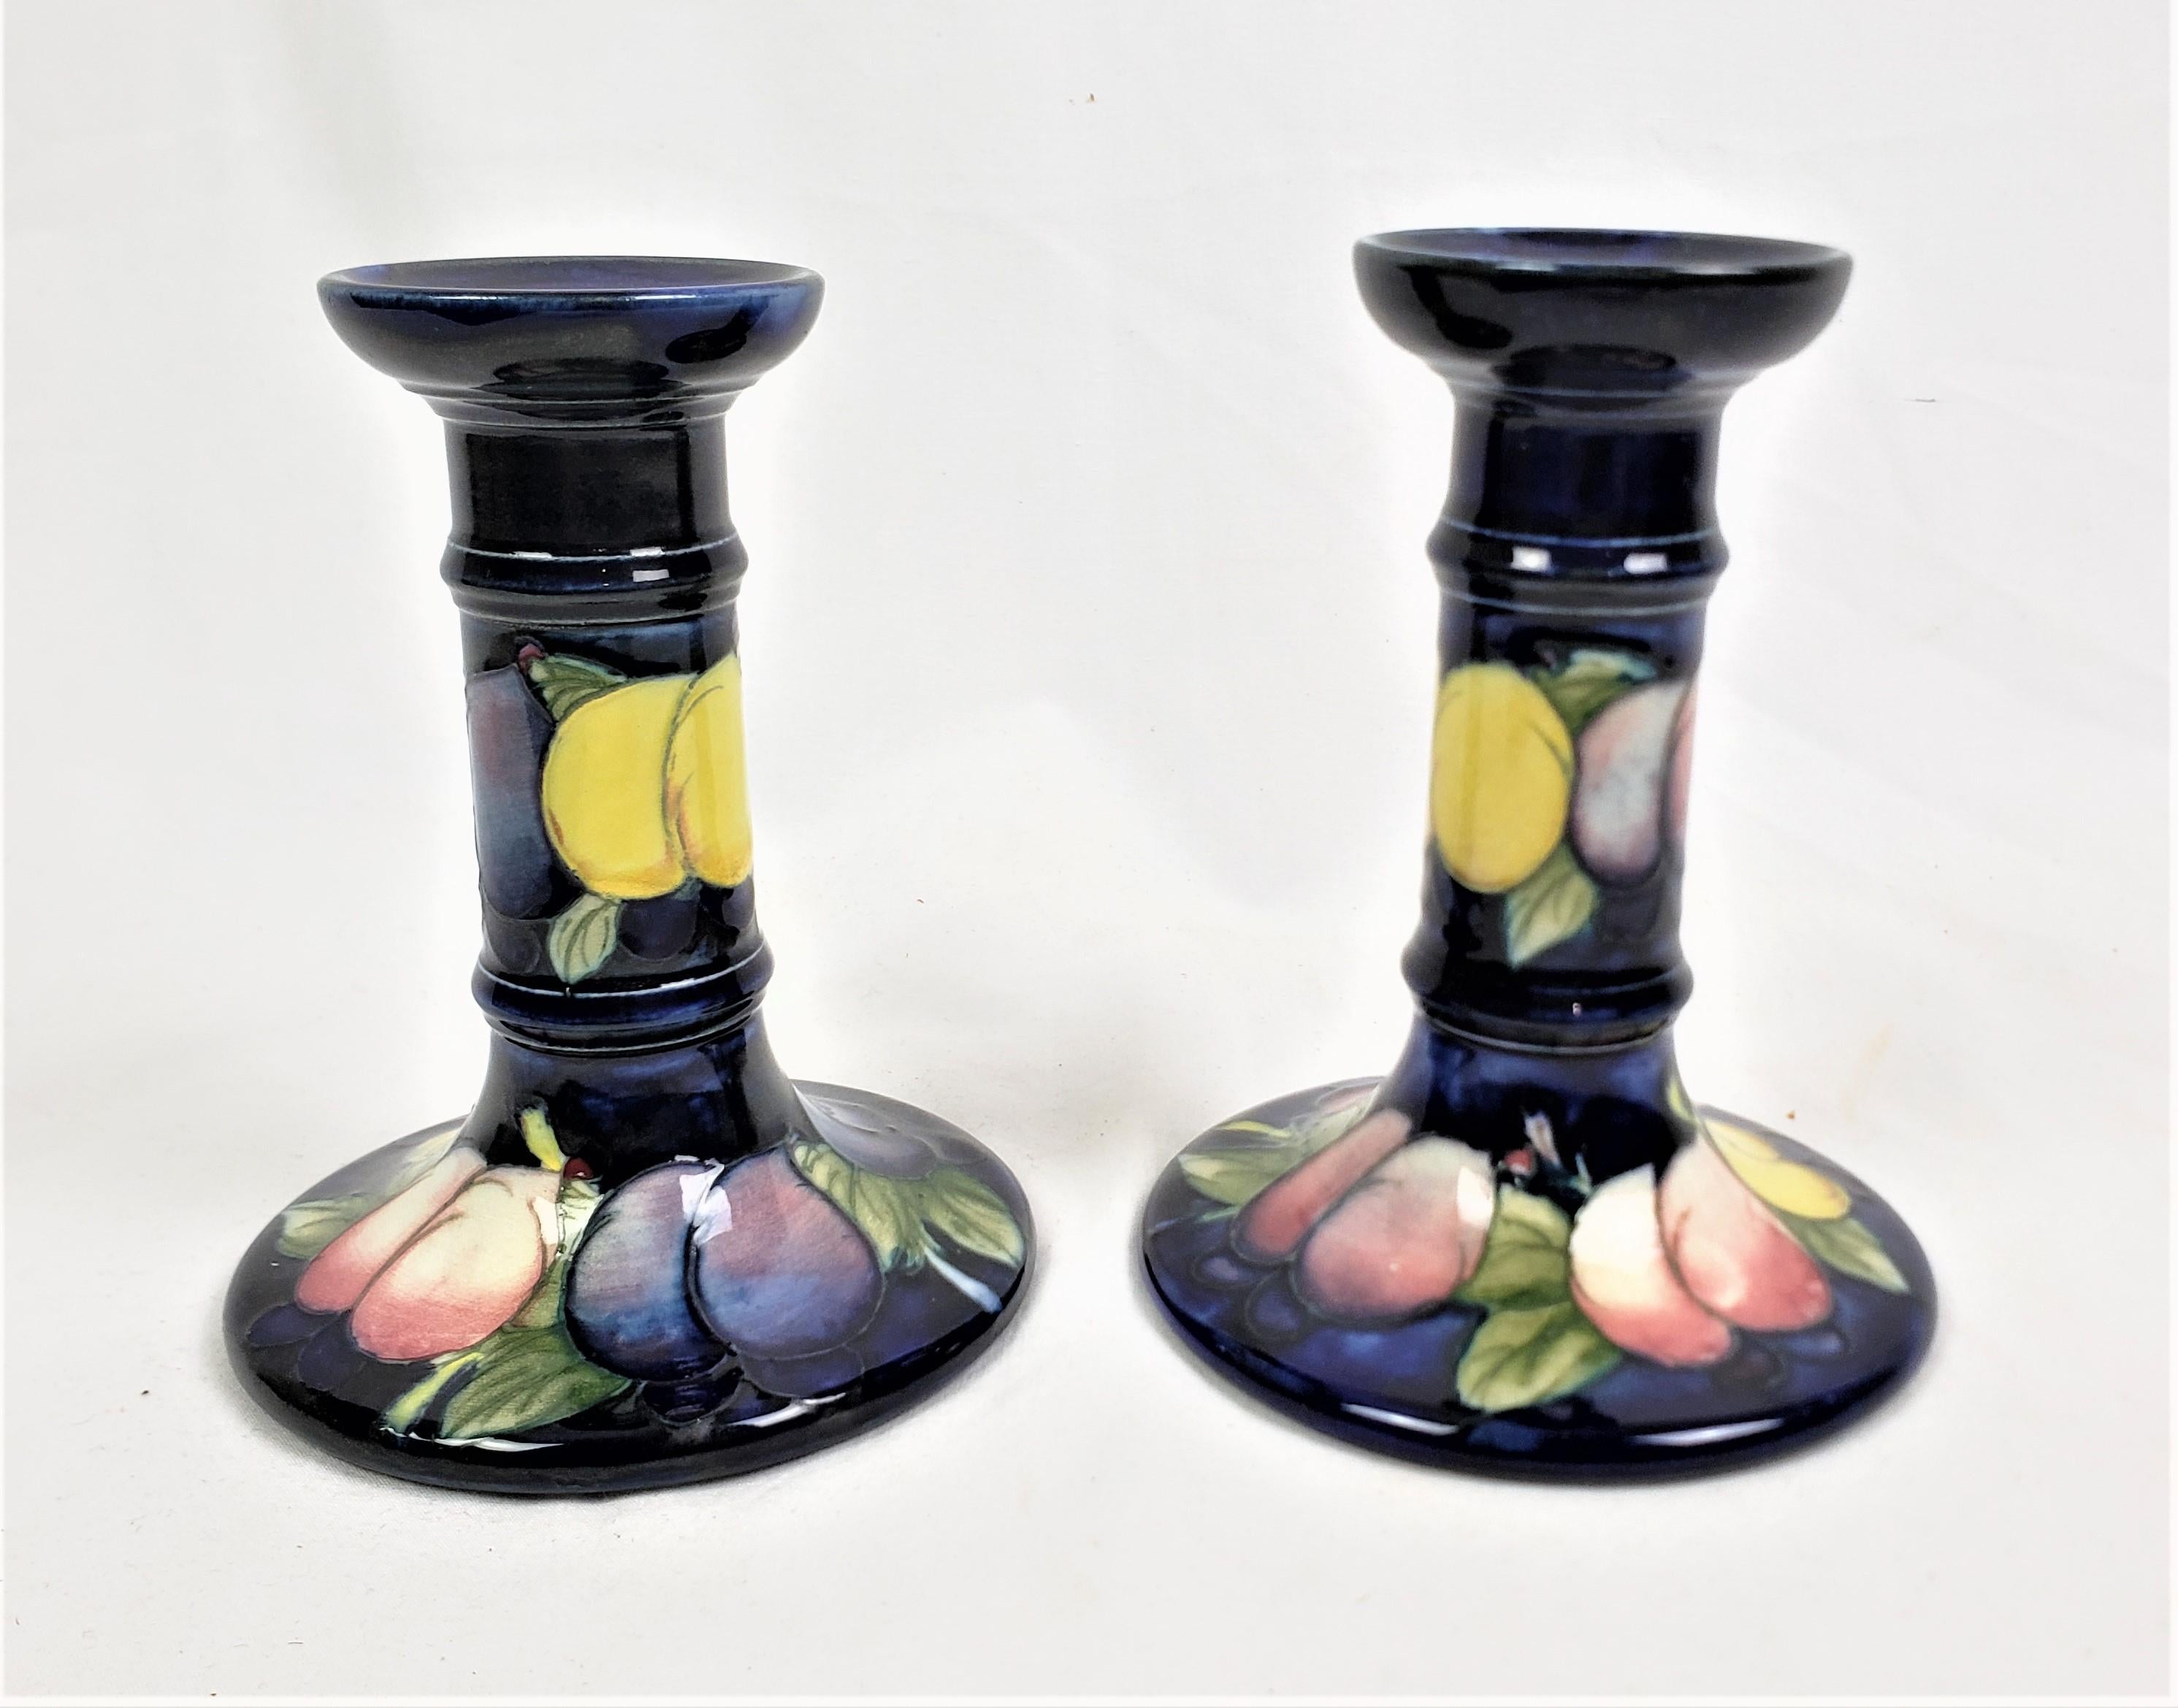 This pair of art pottery candlesticks were made by the well known Moorcroft Pottery factory of England and date to approximately 1920 and done in their signature style. The candlesticks are done with Moorcroft's cobalt blue ground, with the Wisteria